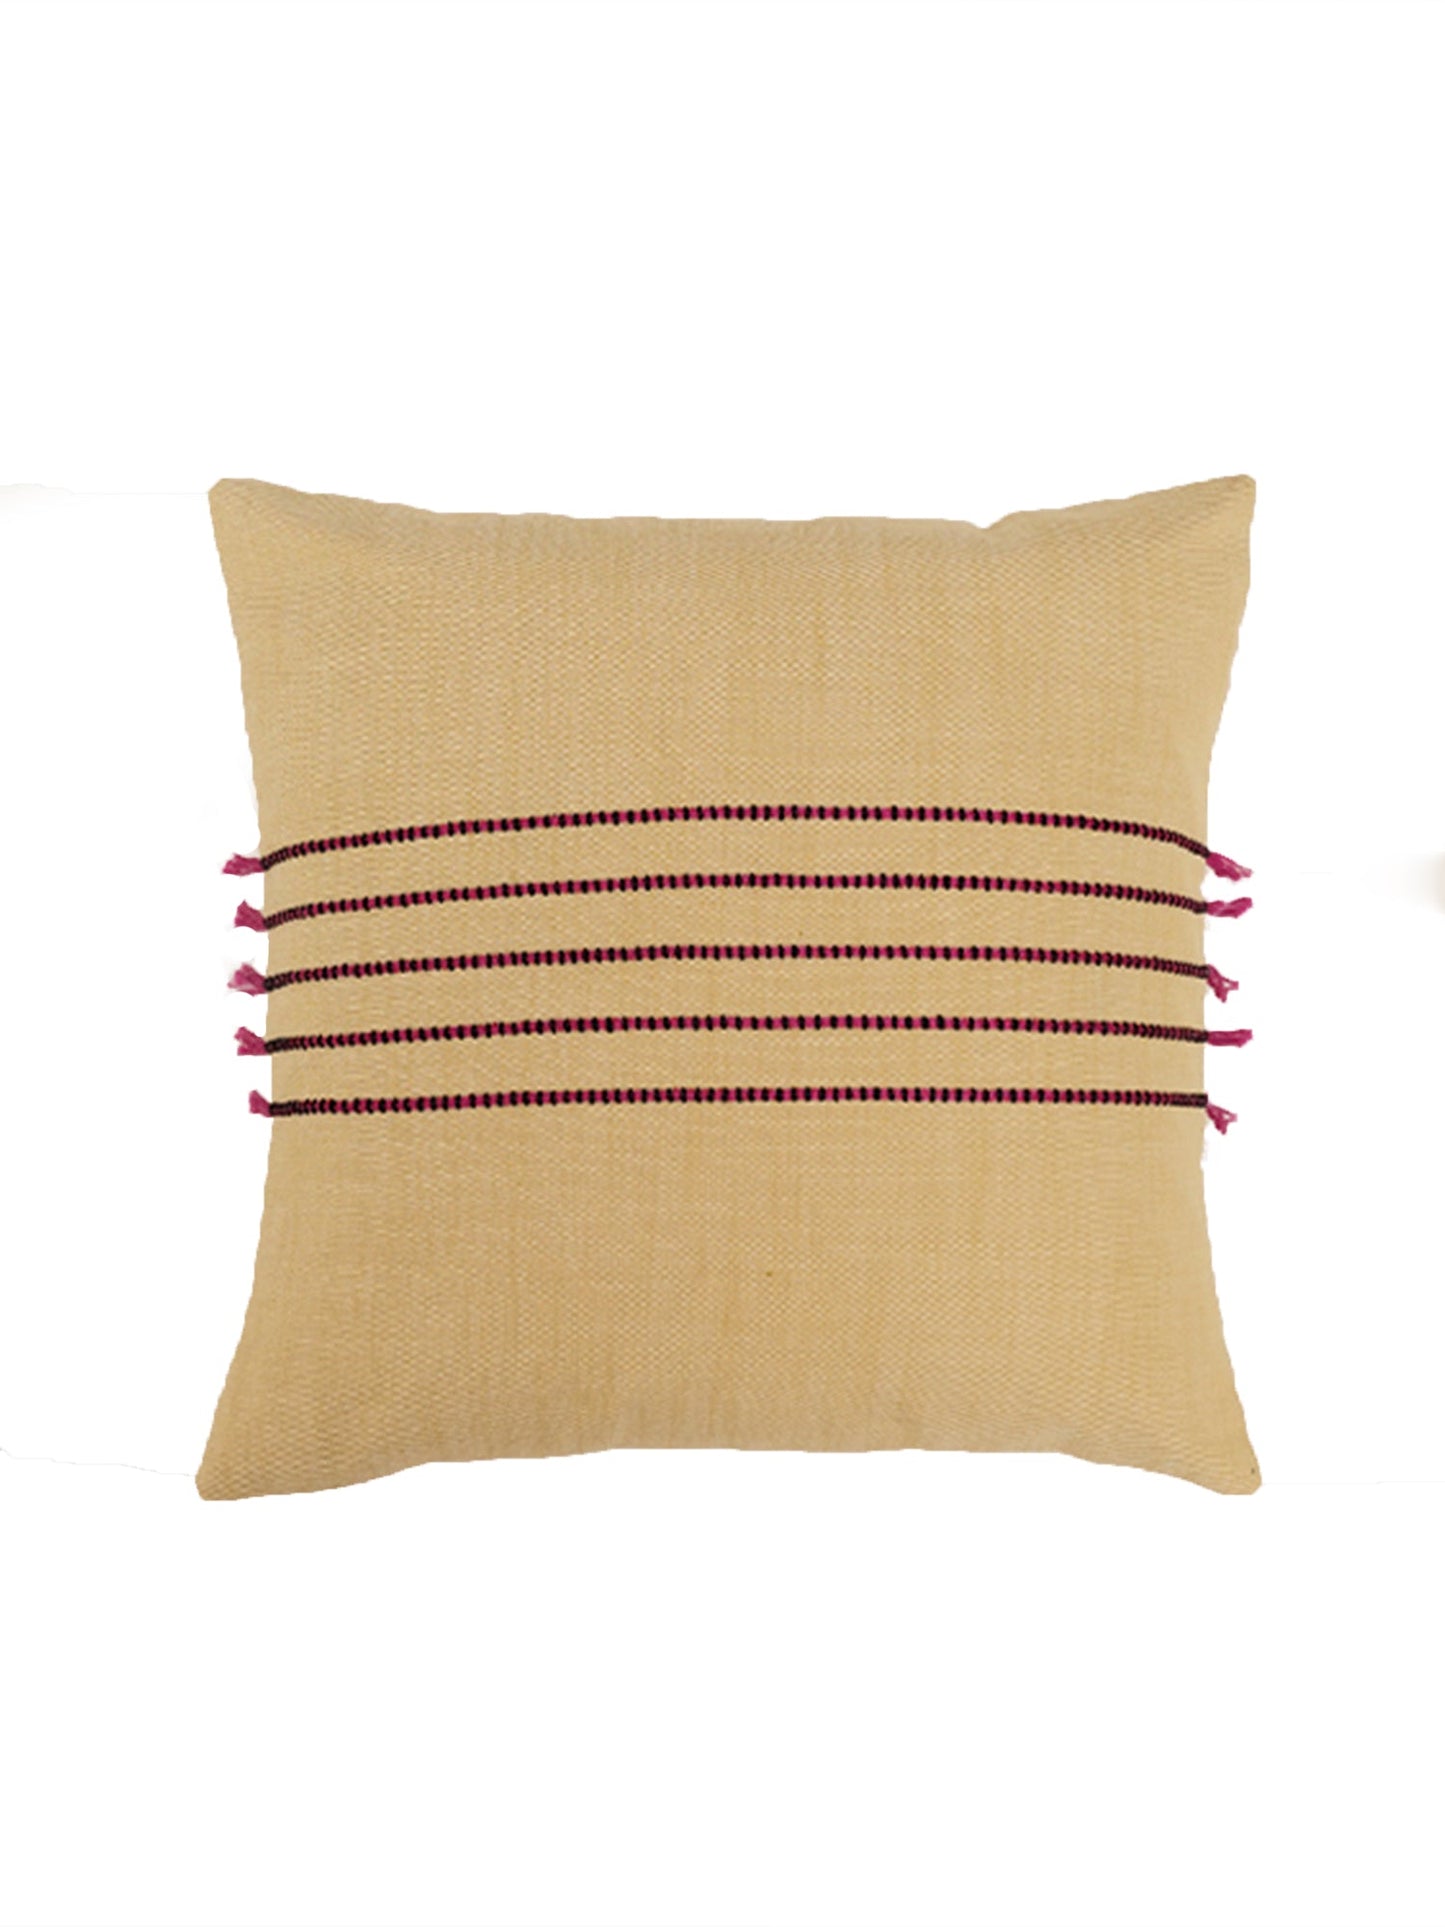 Embroidered Cushion Cover Polyester Blend Yellow - 16"x16"